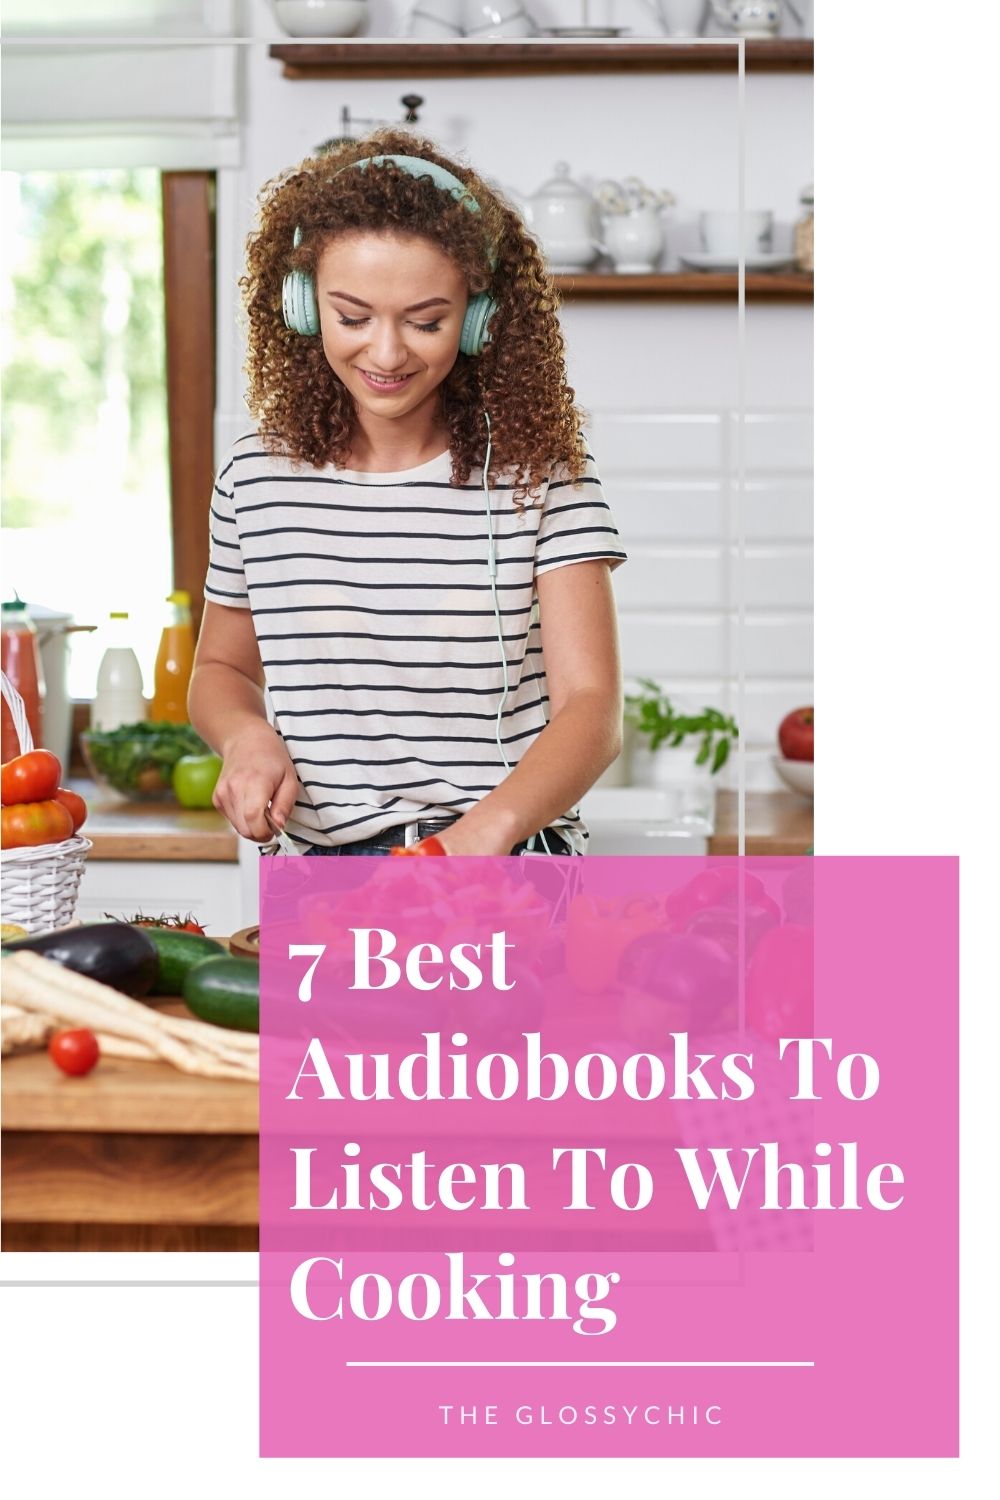 7 Best Audiobooks To Listen To While Cooking